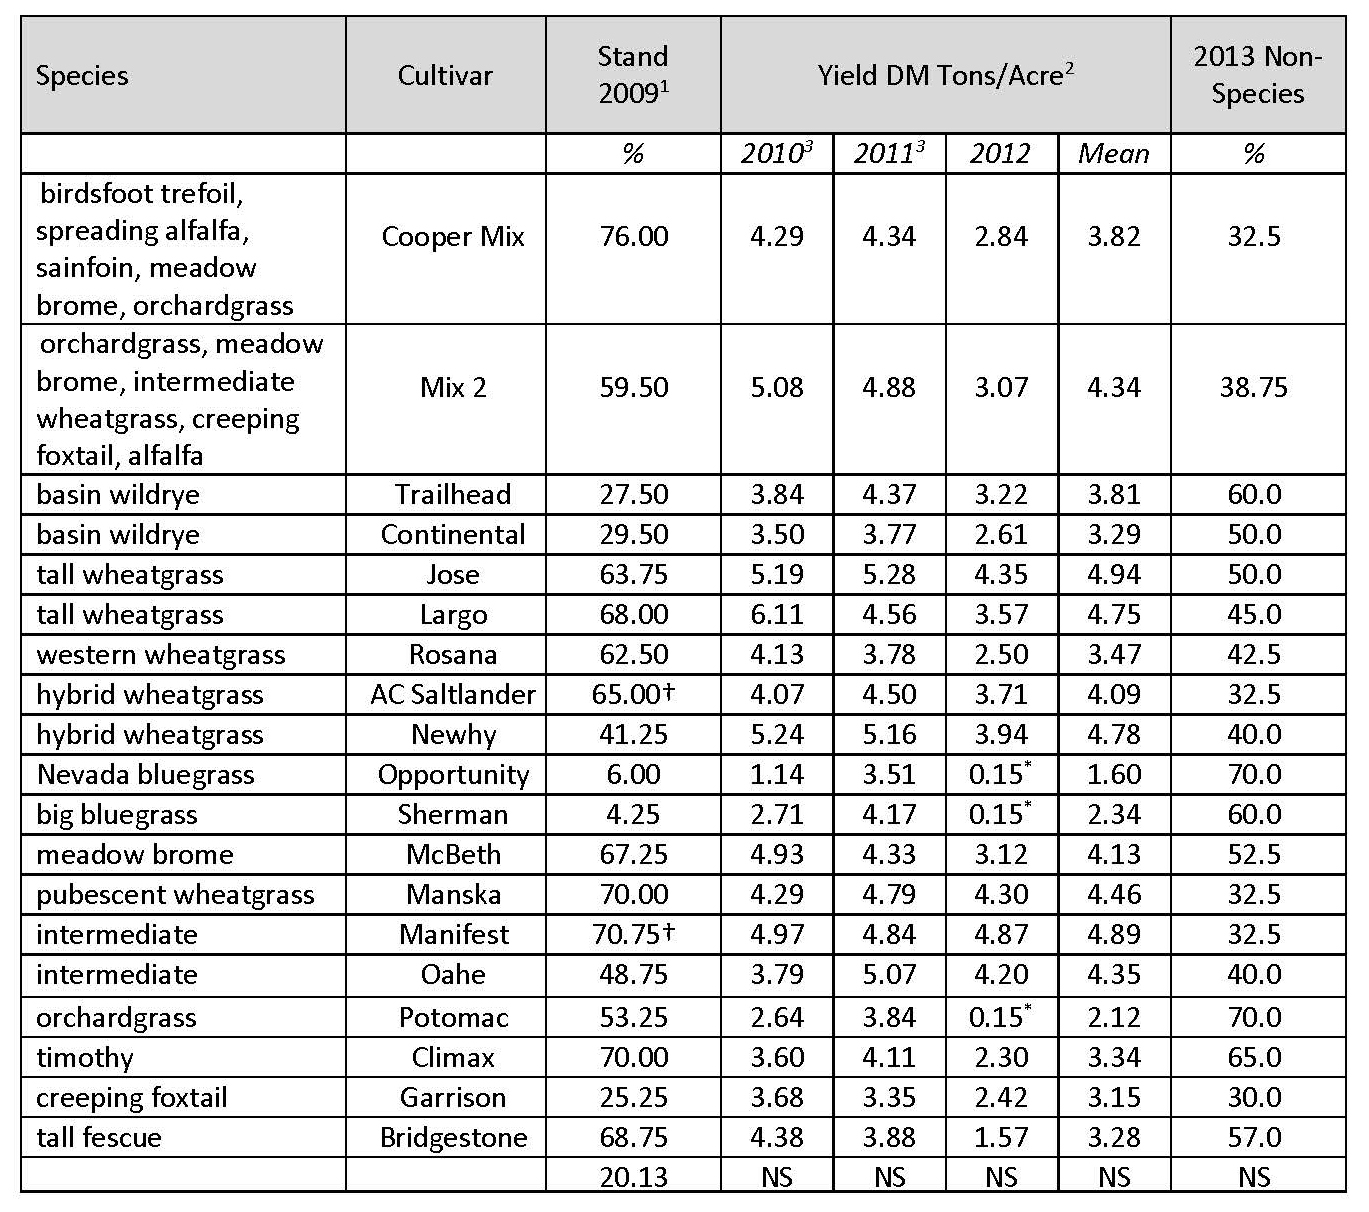 Table 4. Irrigated cool season grass stand percentages and forage yields from 2010 to 2012 and percent non-species present in 2013 at MSU-NARC, Ft. Assiniboine, MT.